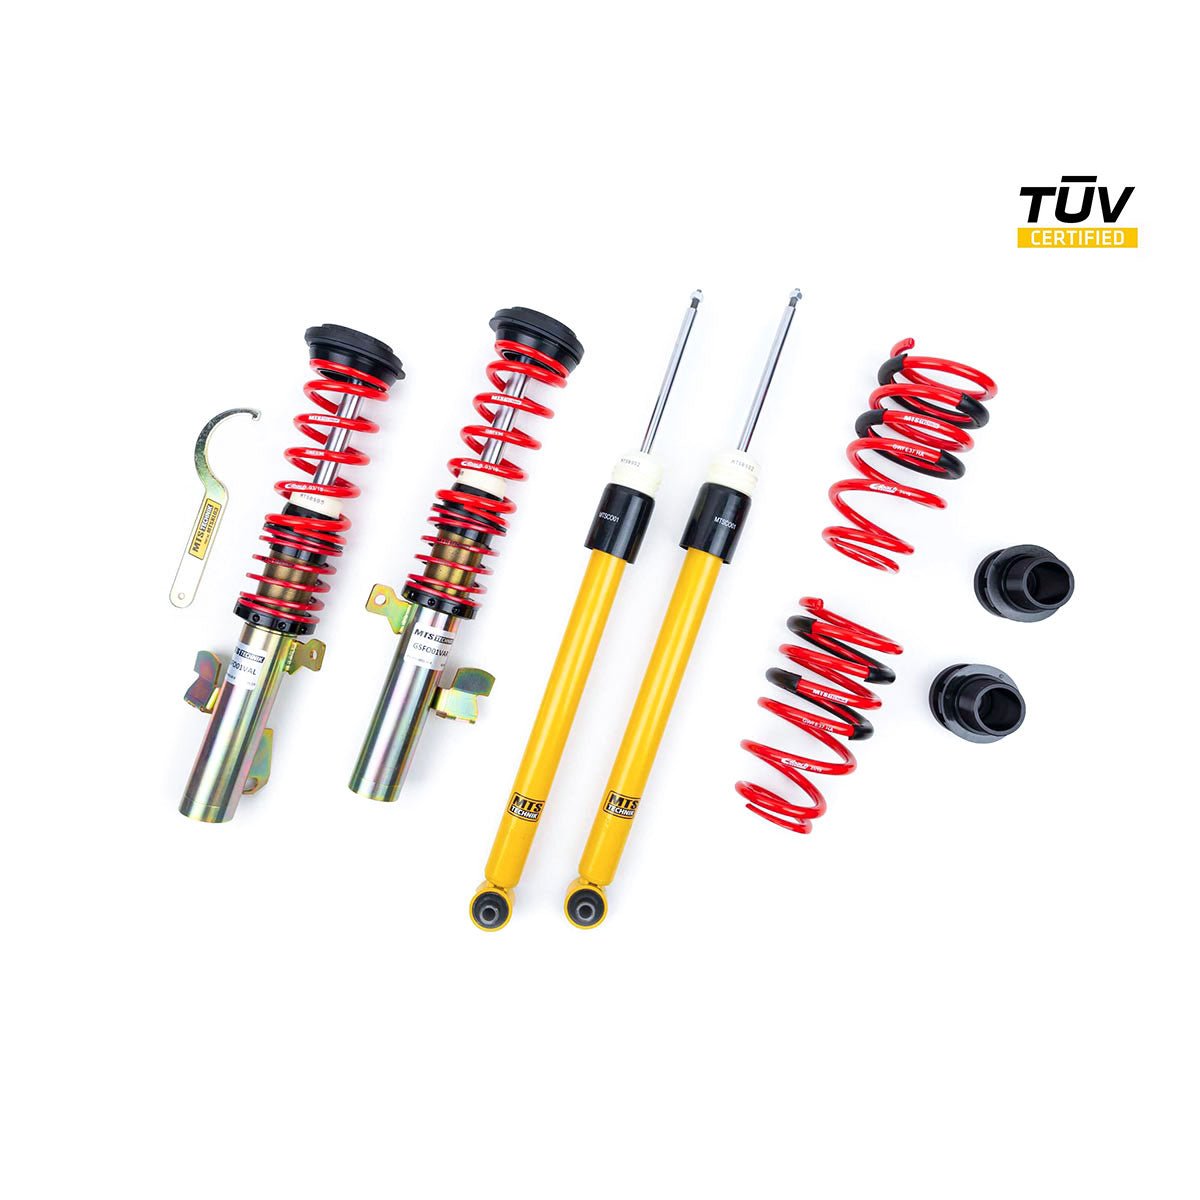 MTS TECHNIK coilover kit STREET Ford Focus MK2 Hatchback (with TÜV) - PARTS33 GmbH